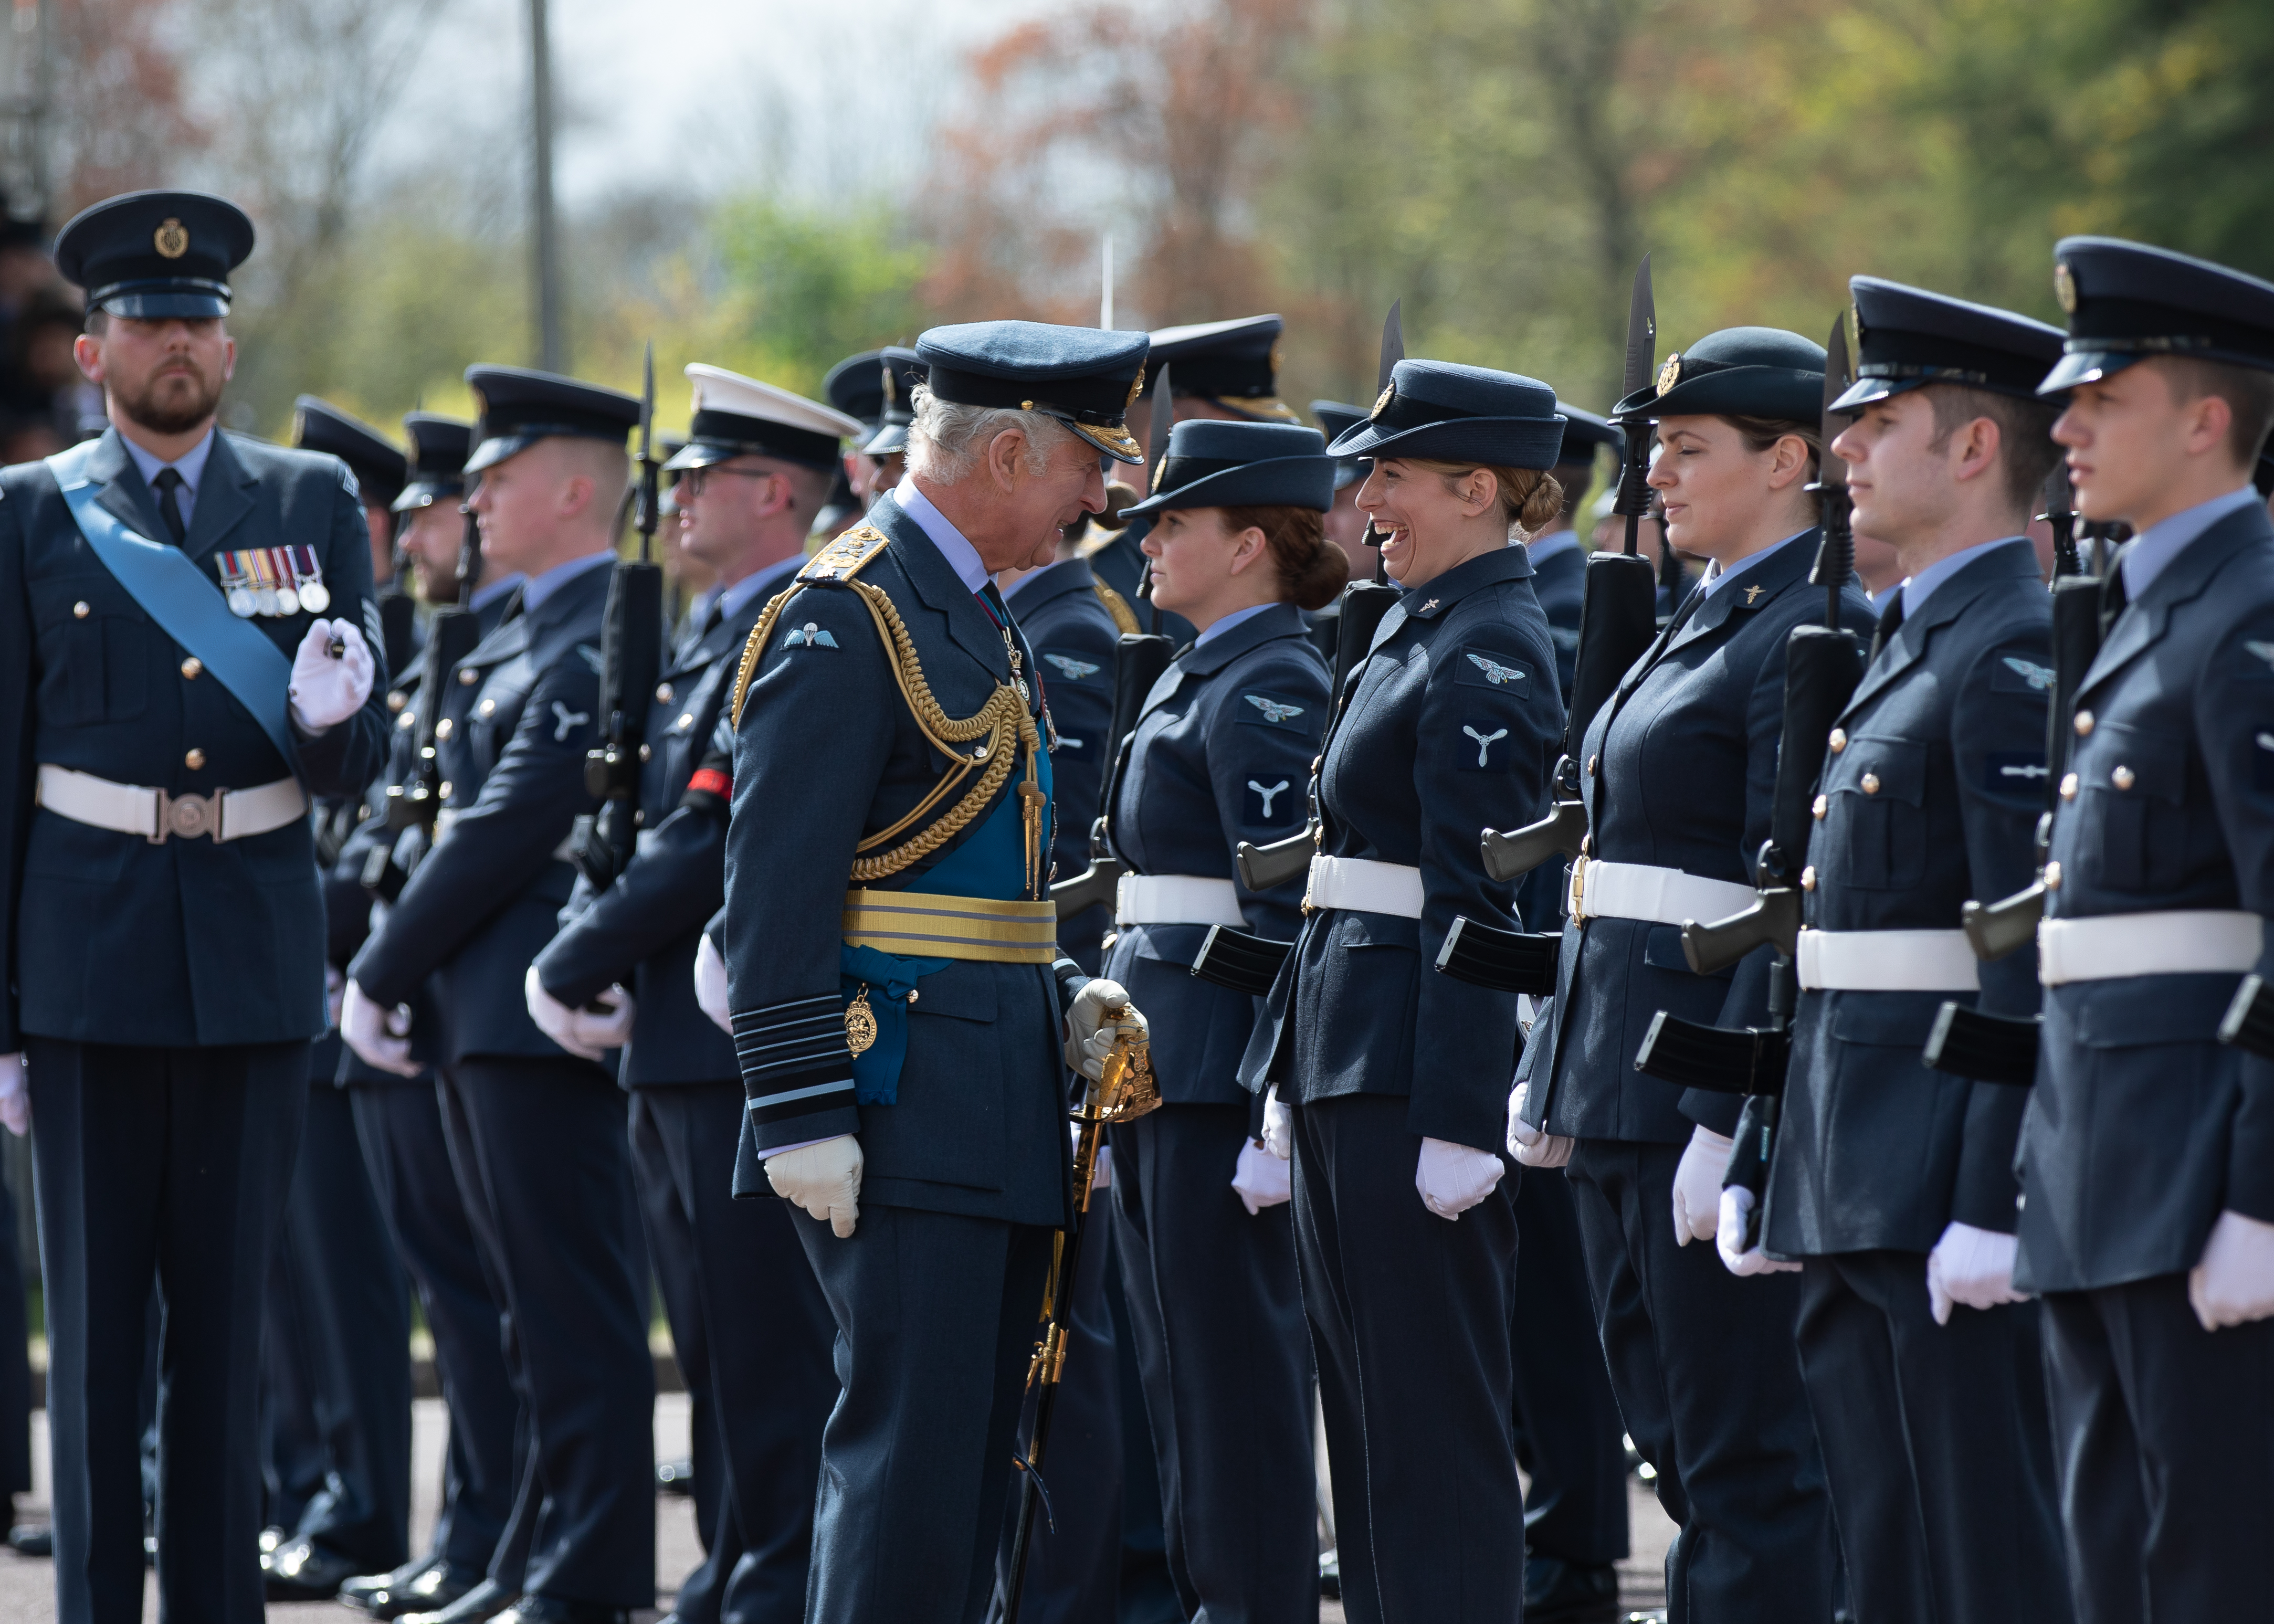 The Prince of Wales talks to personnel during parade.